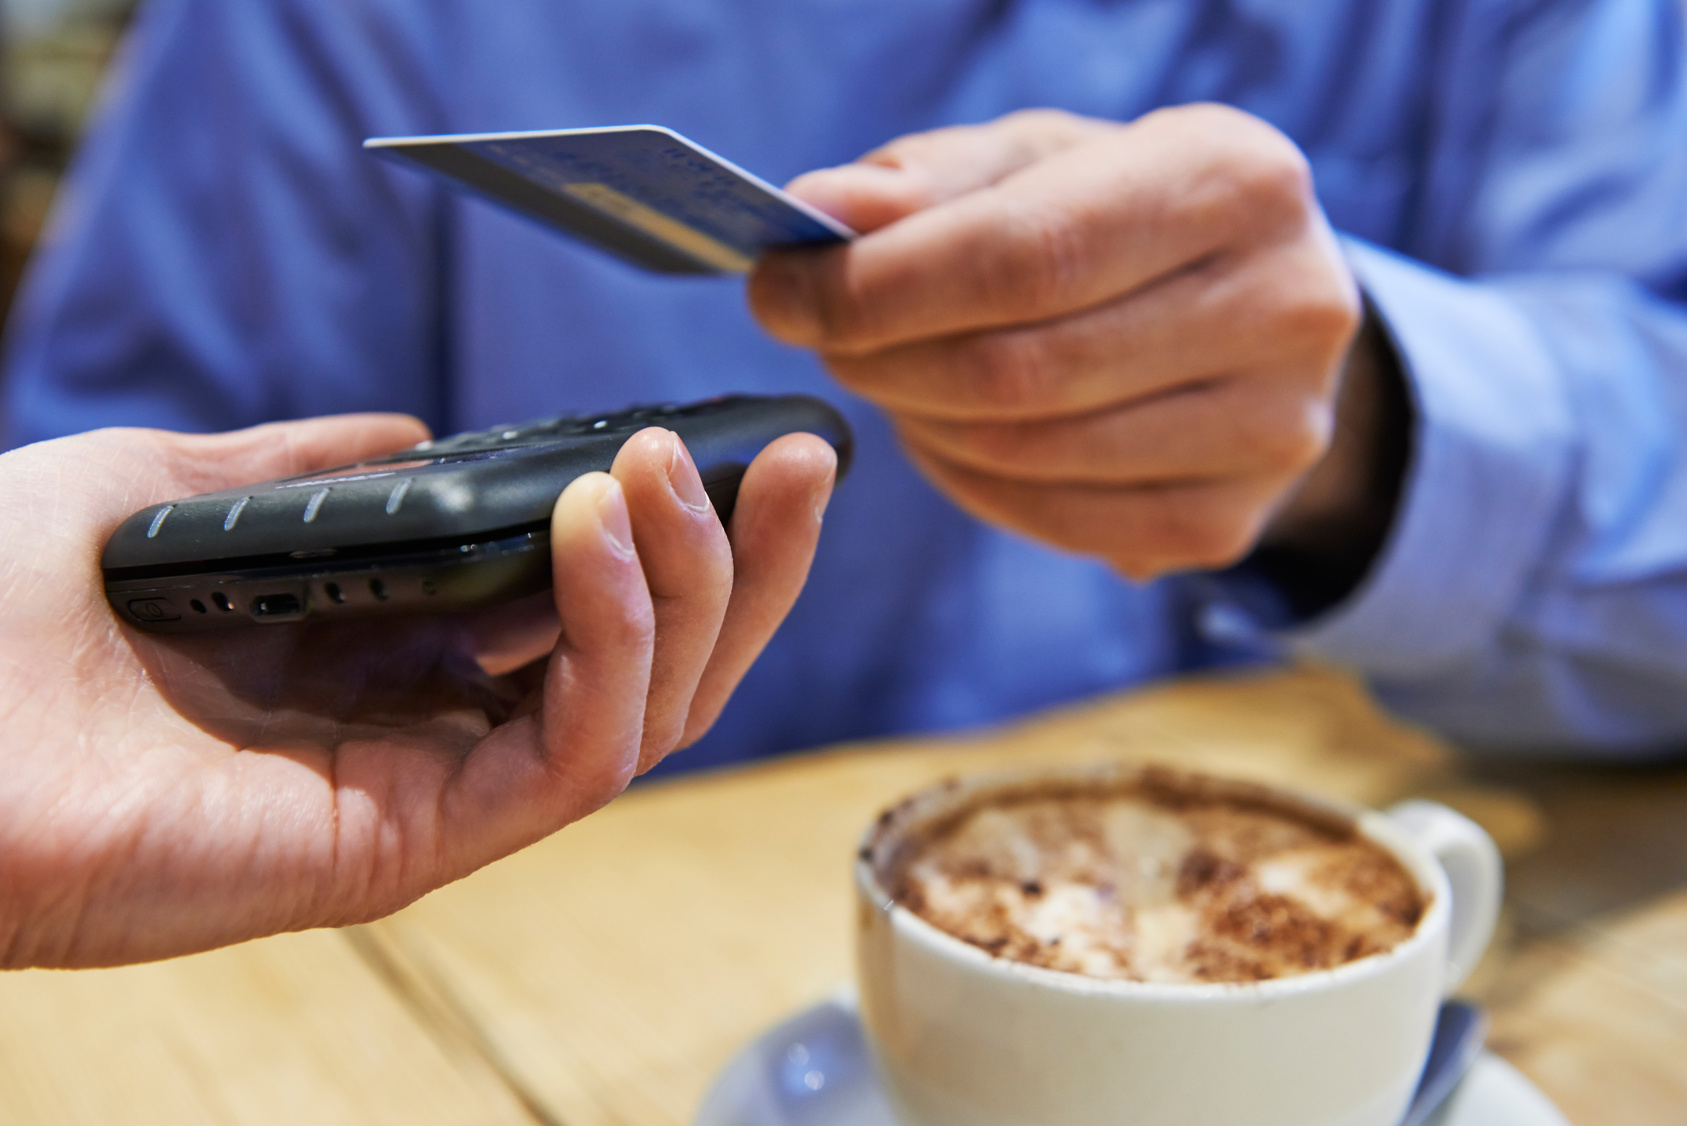 Contactless payments growth